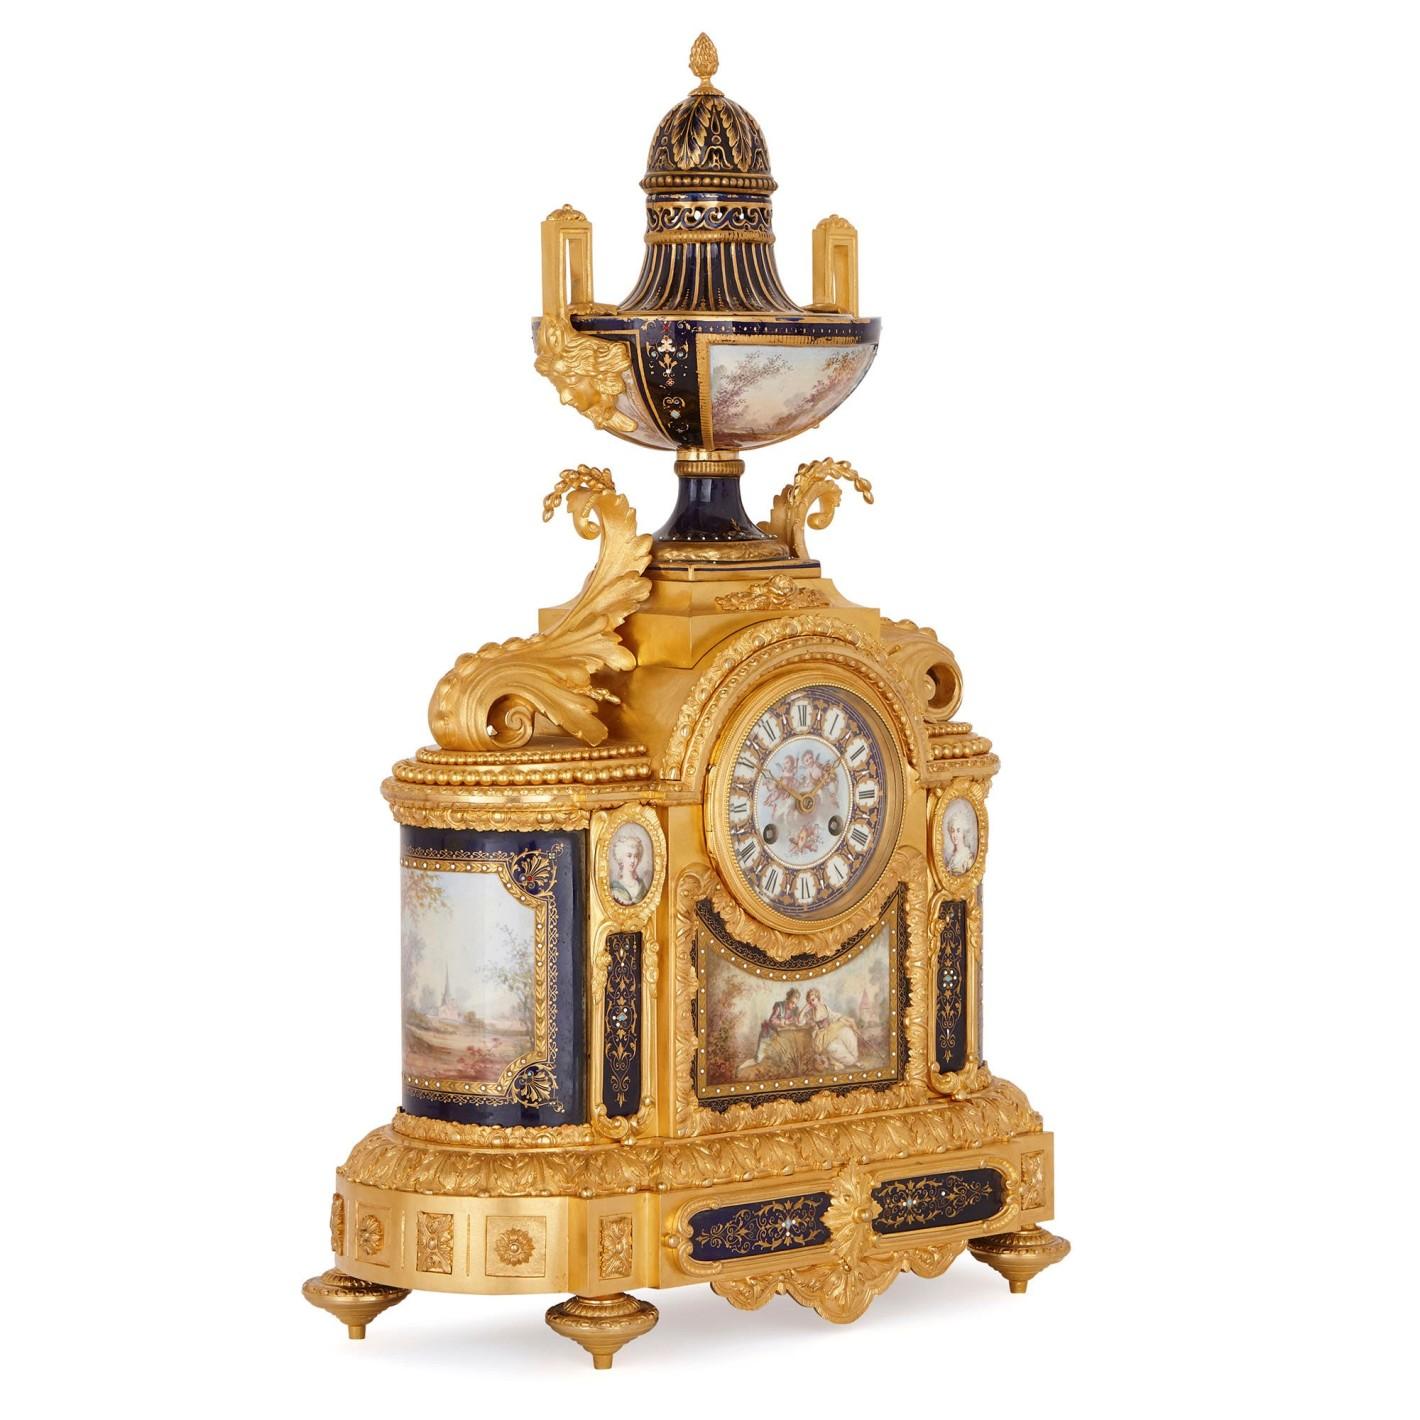 A fine quality 19th century French Sevres style porcelain and gilded ormolu clock garniture. The pair of five branch gilded ormolu candelabra each having Sevres style porcelain urns and pedestals with classical romantic scenes painted on them. The